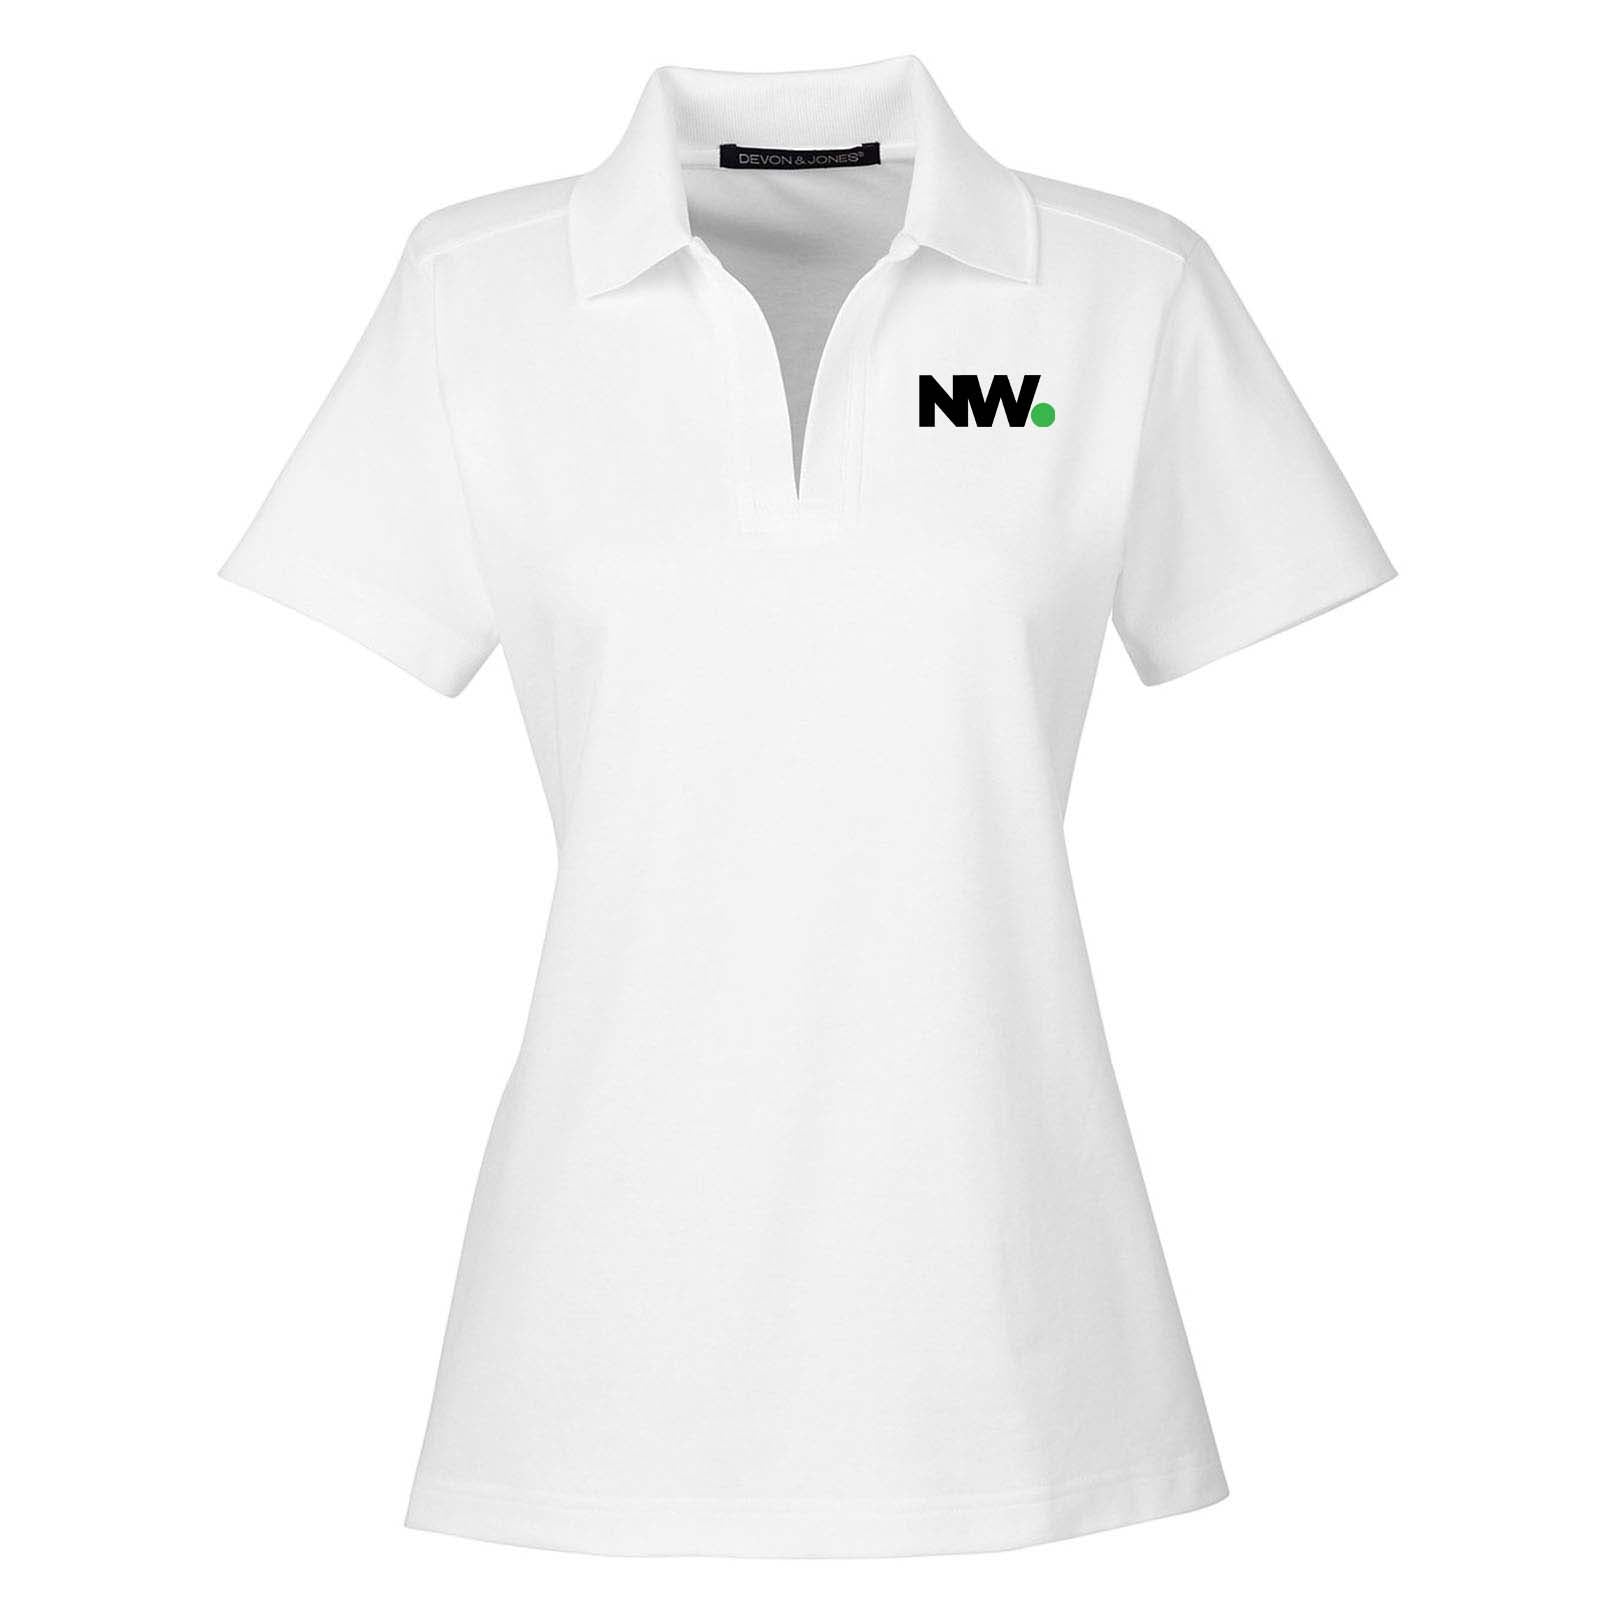 Nationwide Video Logo Embroidered CrownLux Performance Polyester/Cotton Blend Women's Plaited Polo T-Shirt - Mato & Hash